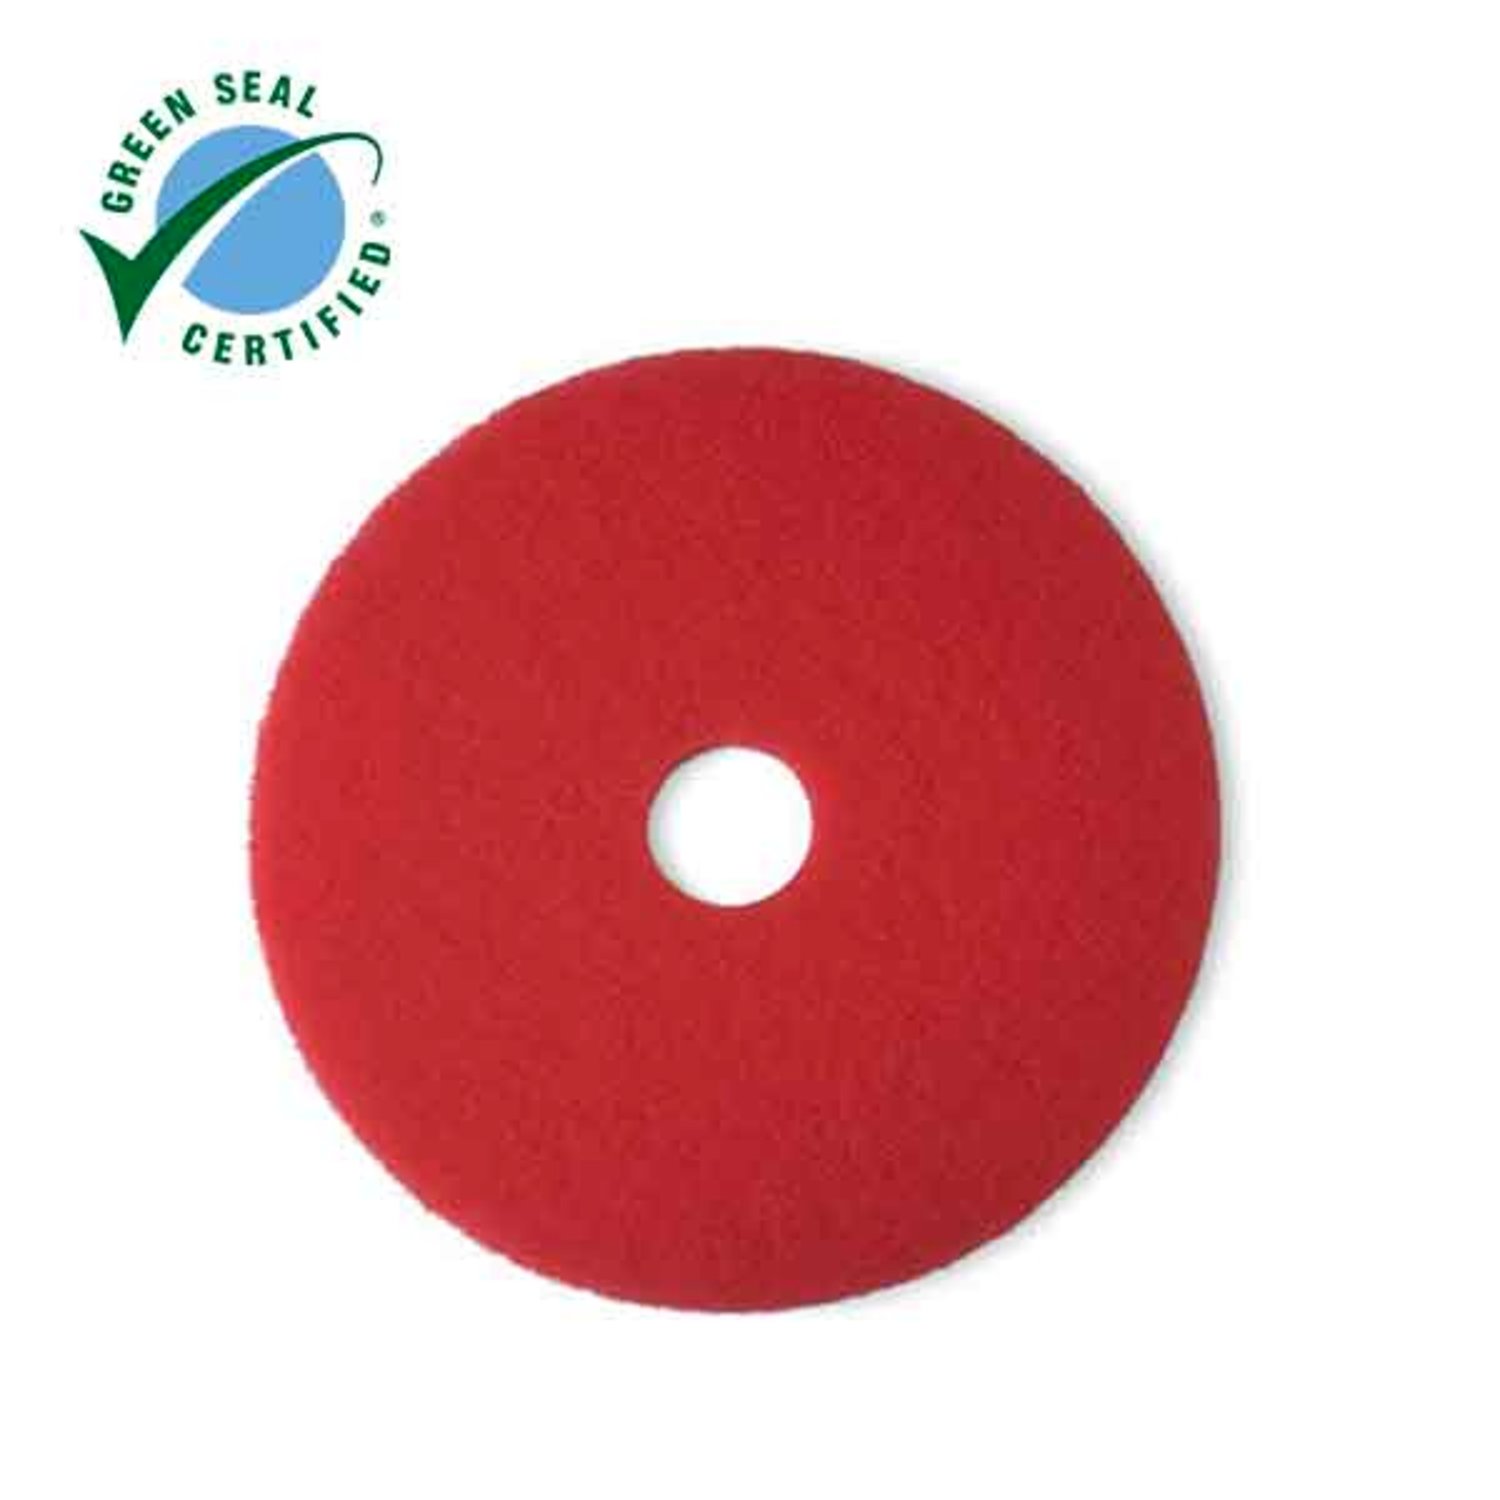 7000045909 - Scotch-Brite Red Buffing Pad 5100N, Red, 255 mm, 10 in, 5 ea/Case